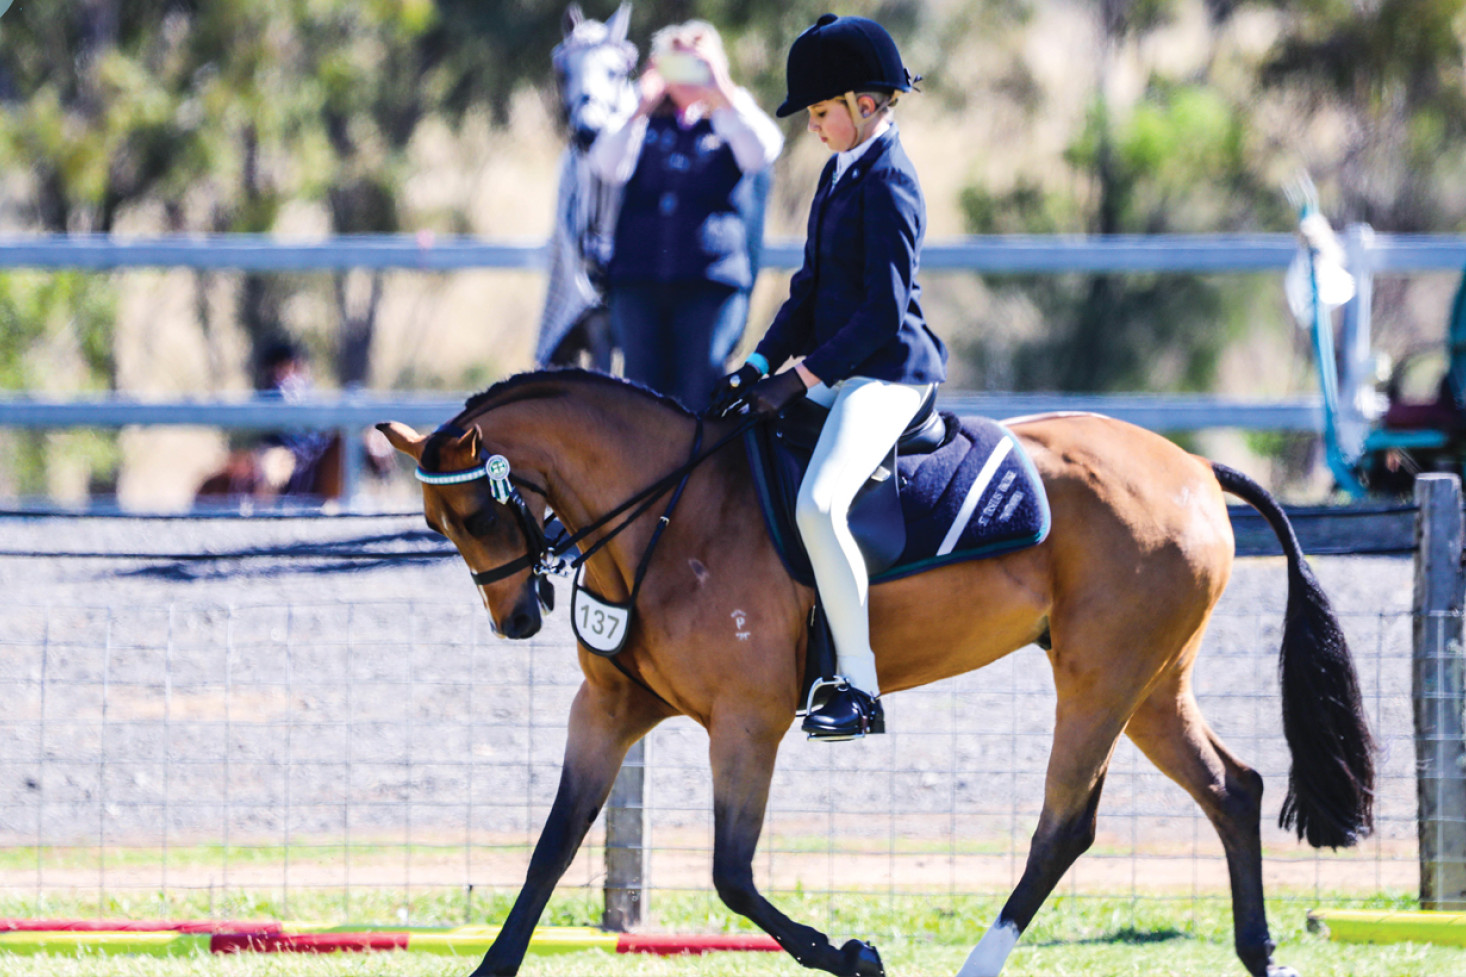 Peyton Alexander-Smith had a successful weekend at the Interschool Darling Downs and South West Qld Regional Championships riding both Tanglewood Park Statesman, Archie and Cheraton Brandy Snap, Buddy (pictured).